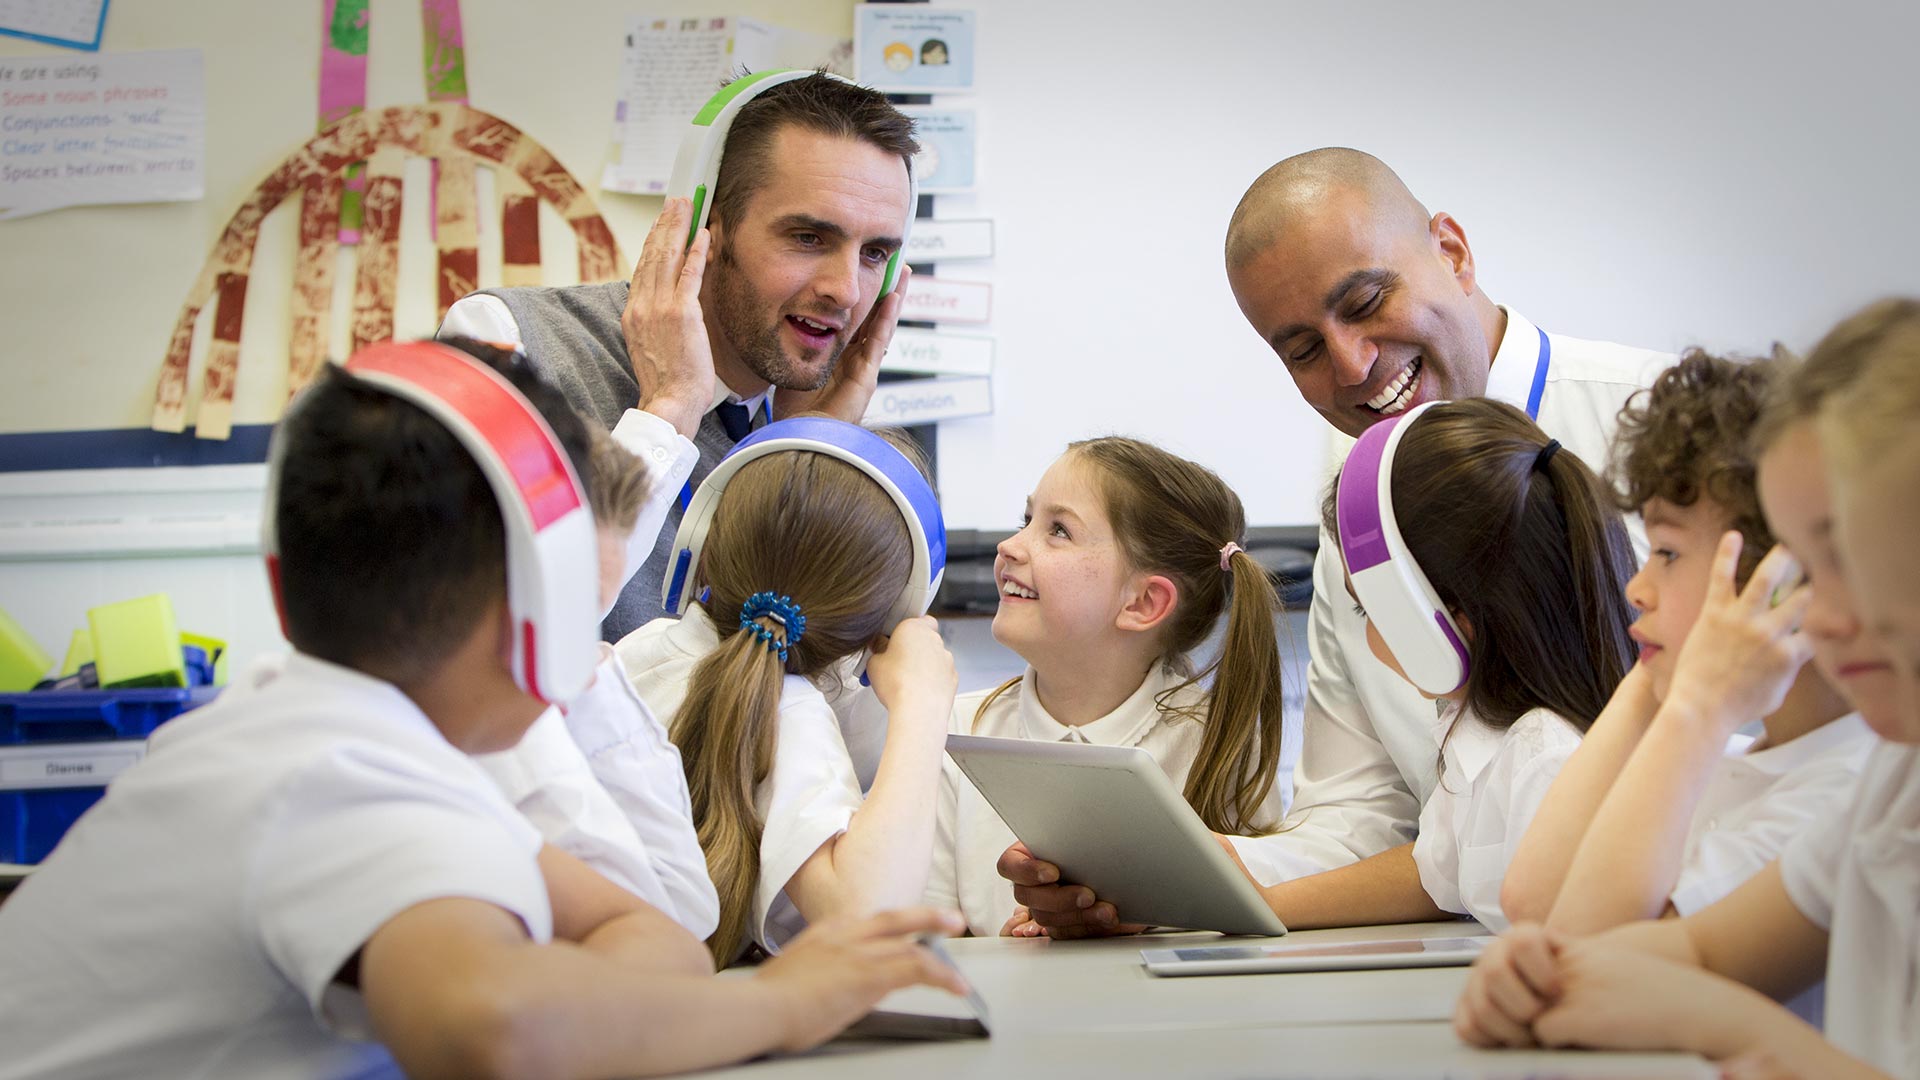 Teachers using technology with grade school students